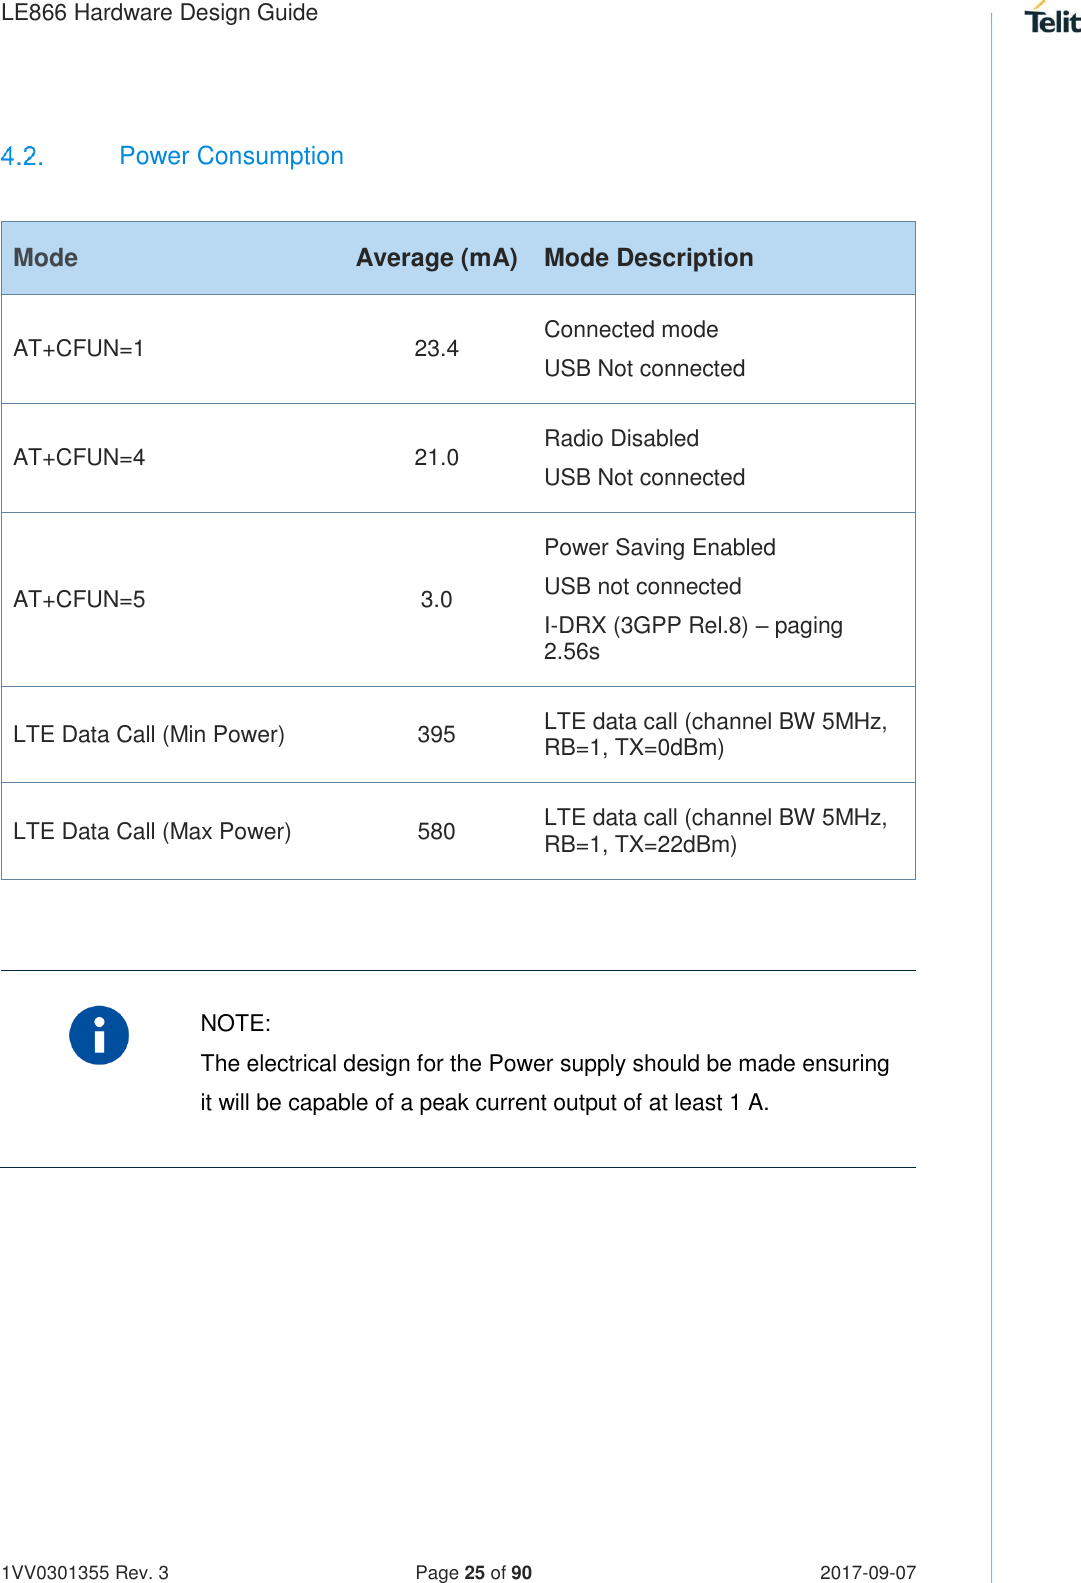 LE866 Hardware Design Guide   1VV0301355 Rev. 3   Page 25 of 90 2017-09-07     Power Consumption  Mode Average (mA) Mode Description AT+CFUN=1 23.4 Connected mode  USB Not connected AT+CFUN=4 21.0 Radio Disabled USB Not connected AT+CFUN=5 3.0 Power Saving Enabled USB not connected I-DRX (3GPP Rel.8) – paging 2.56s LTE Data Call (Min Power) 395 LTE data call (channel BW 5MHz, RB=1, TX=0dBm) LTE Data Call (Max Power) 580 LTE data call (channel BW 5MHz, RB=1, TX=22dBm)     NOTE: The electrical design for the Power supply should be made ensuring it will be capable of a peak current output of at least 1 A.         